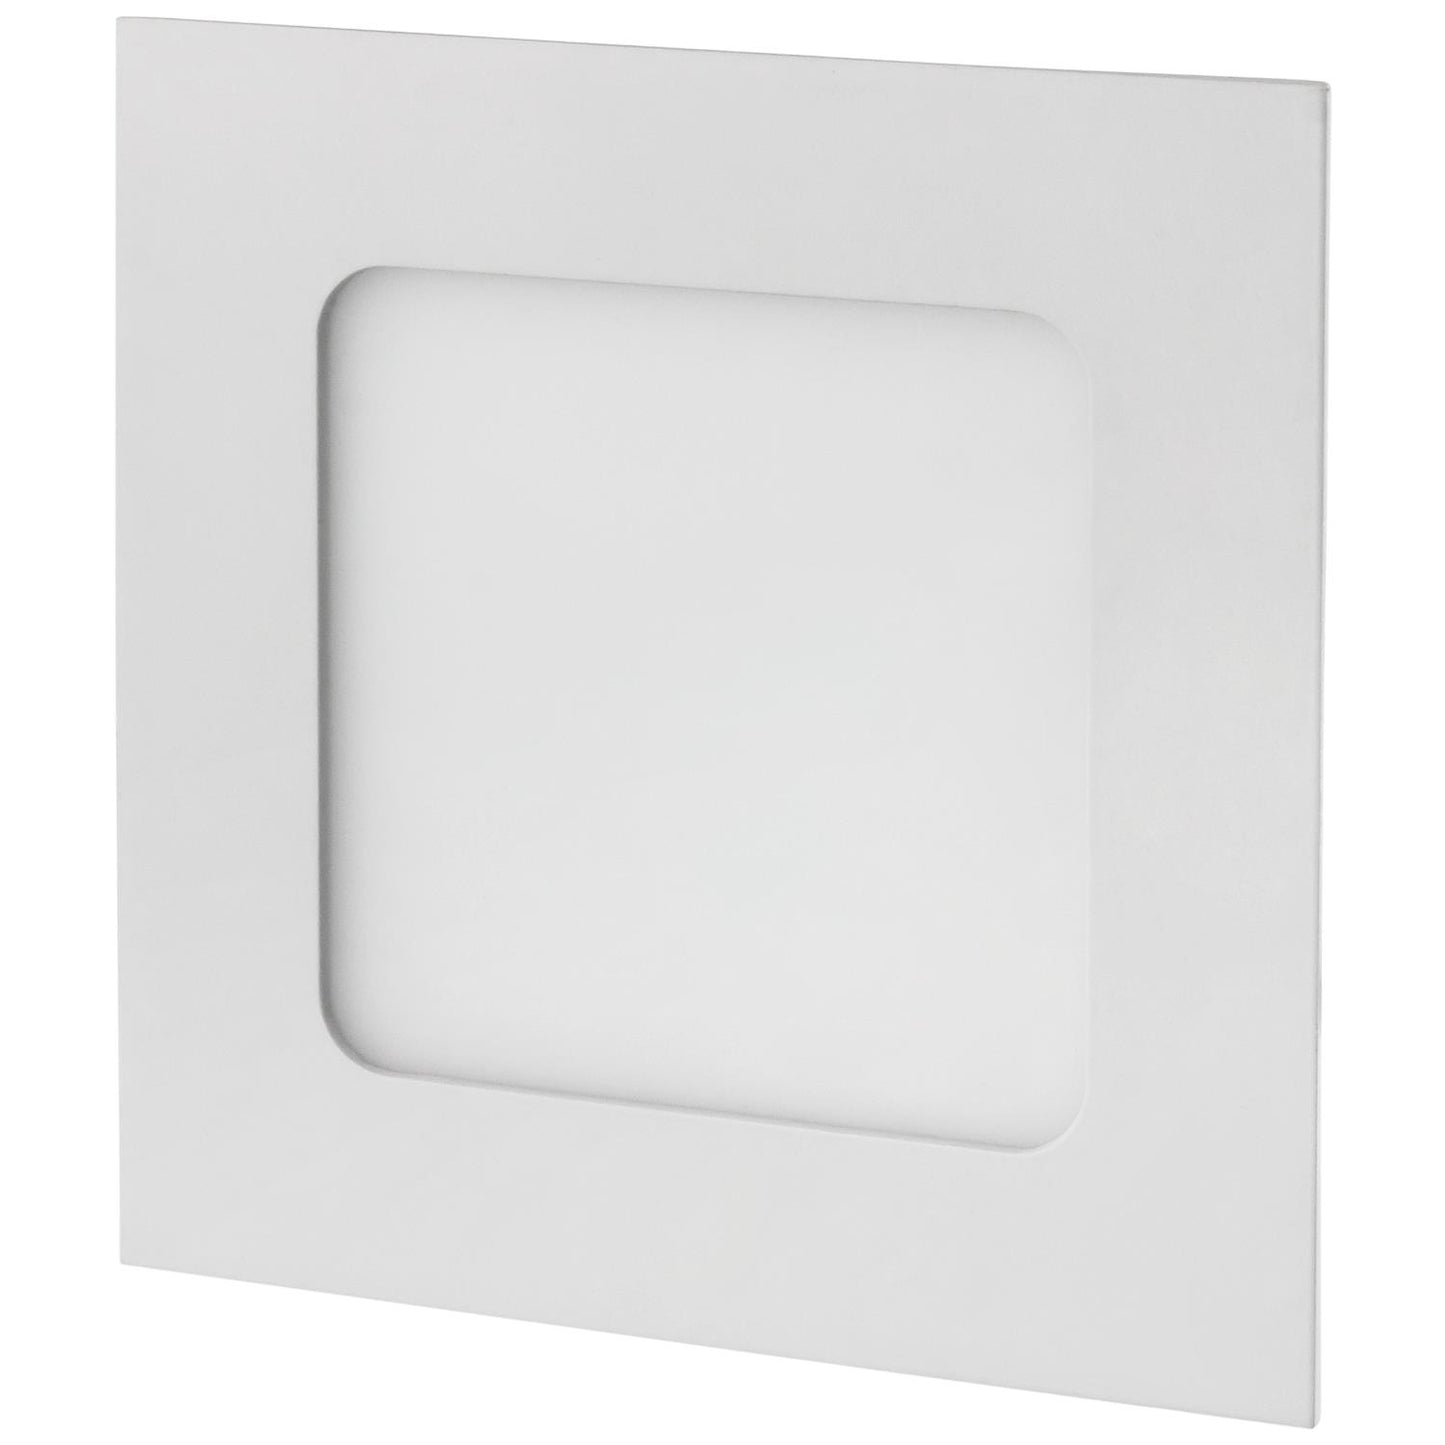 Sunlite 6-Inch Square 12W Recessed Ultra Slim Dimmable LED Downlight, 850 Lumens (75W Equal), 3000K Warm White, ETL & Energy Star, Kitchens & Living Rooms, Commercial & Residential, White